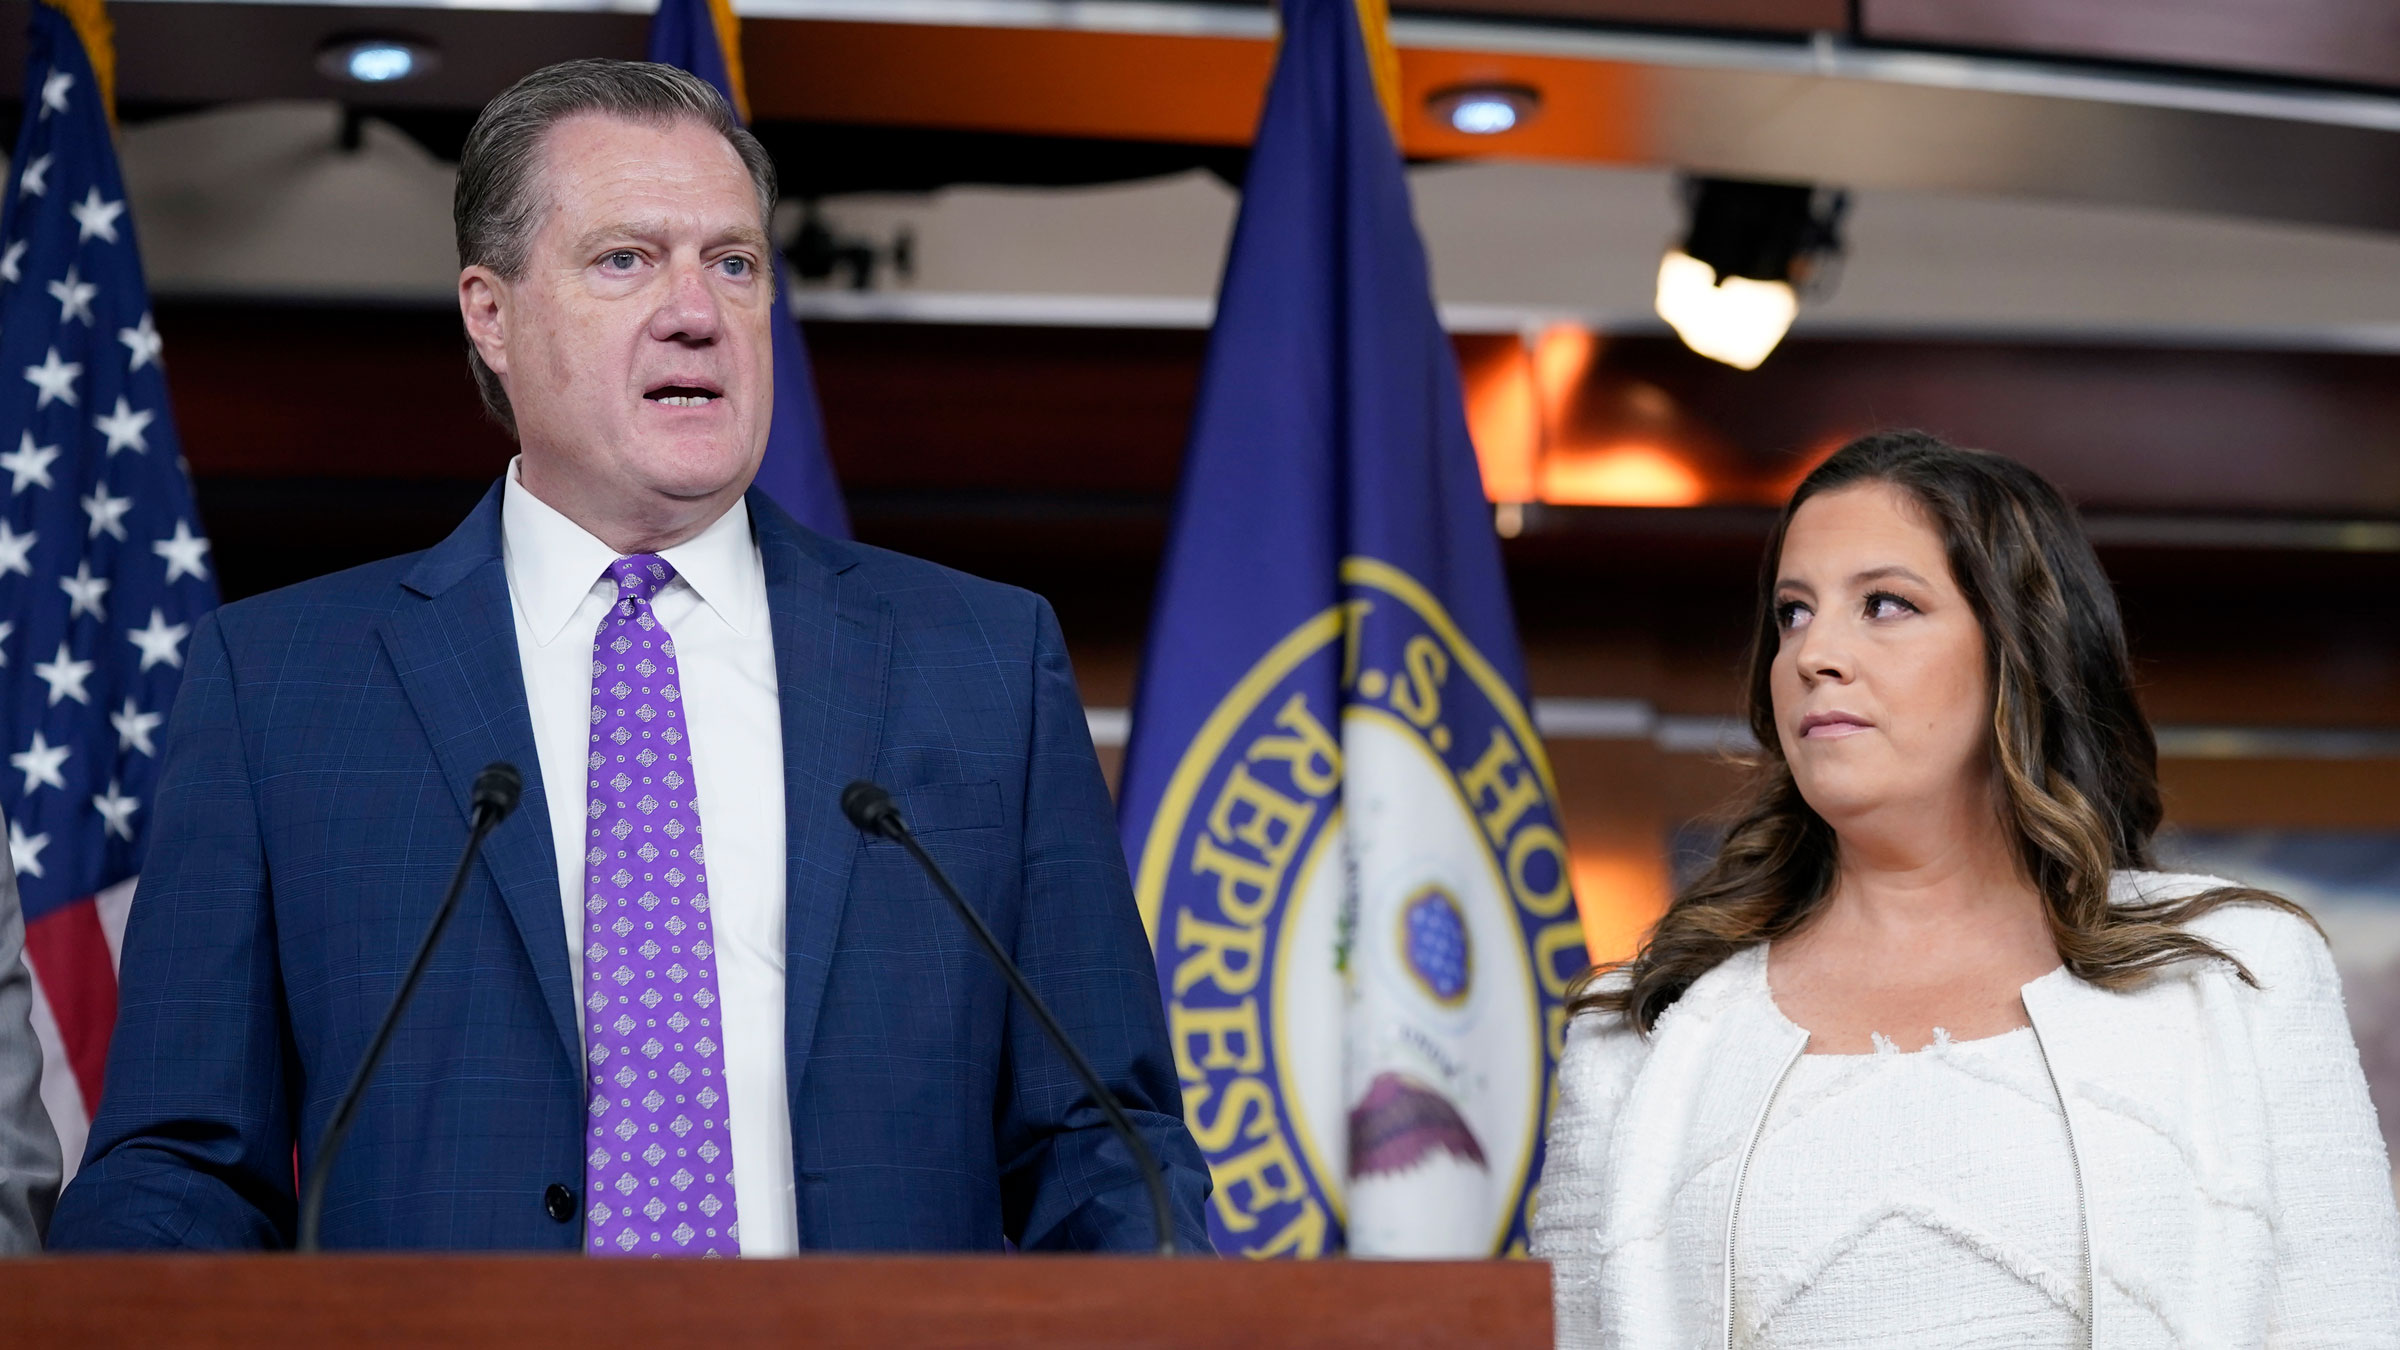 US Rep. Mike Turner speaks during a news conference on Capitol Hill on Friday. On the right is US Rep. Elise Stefanik.